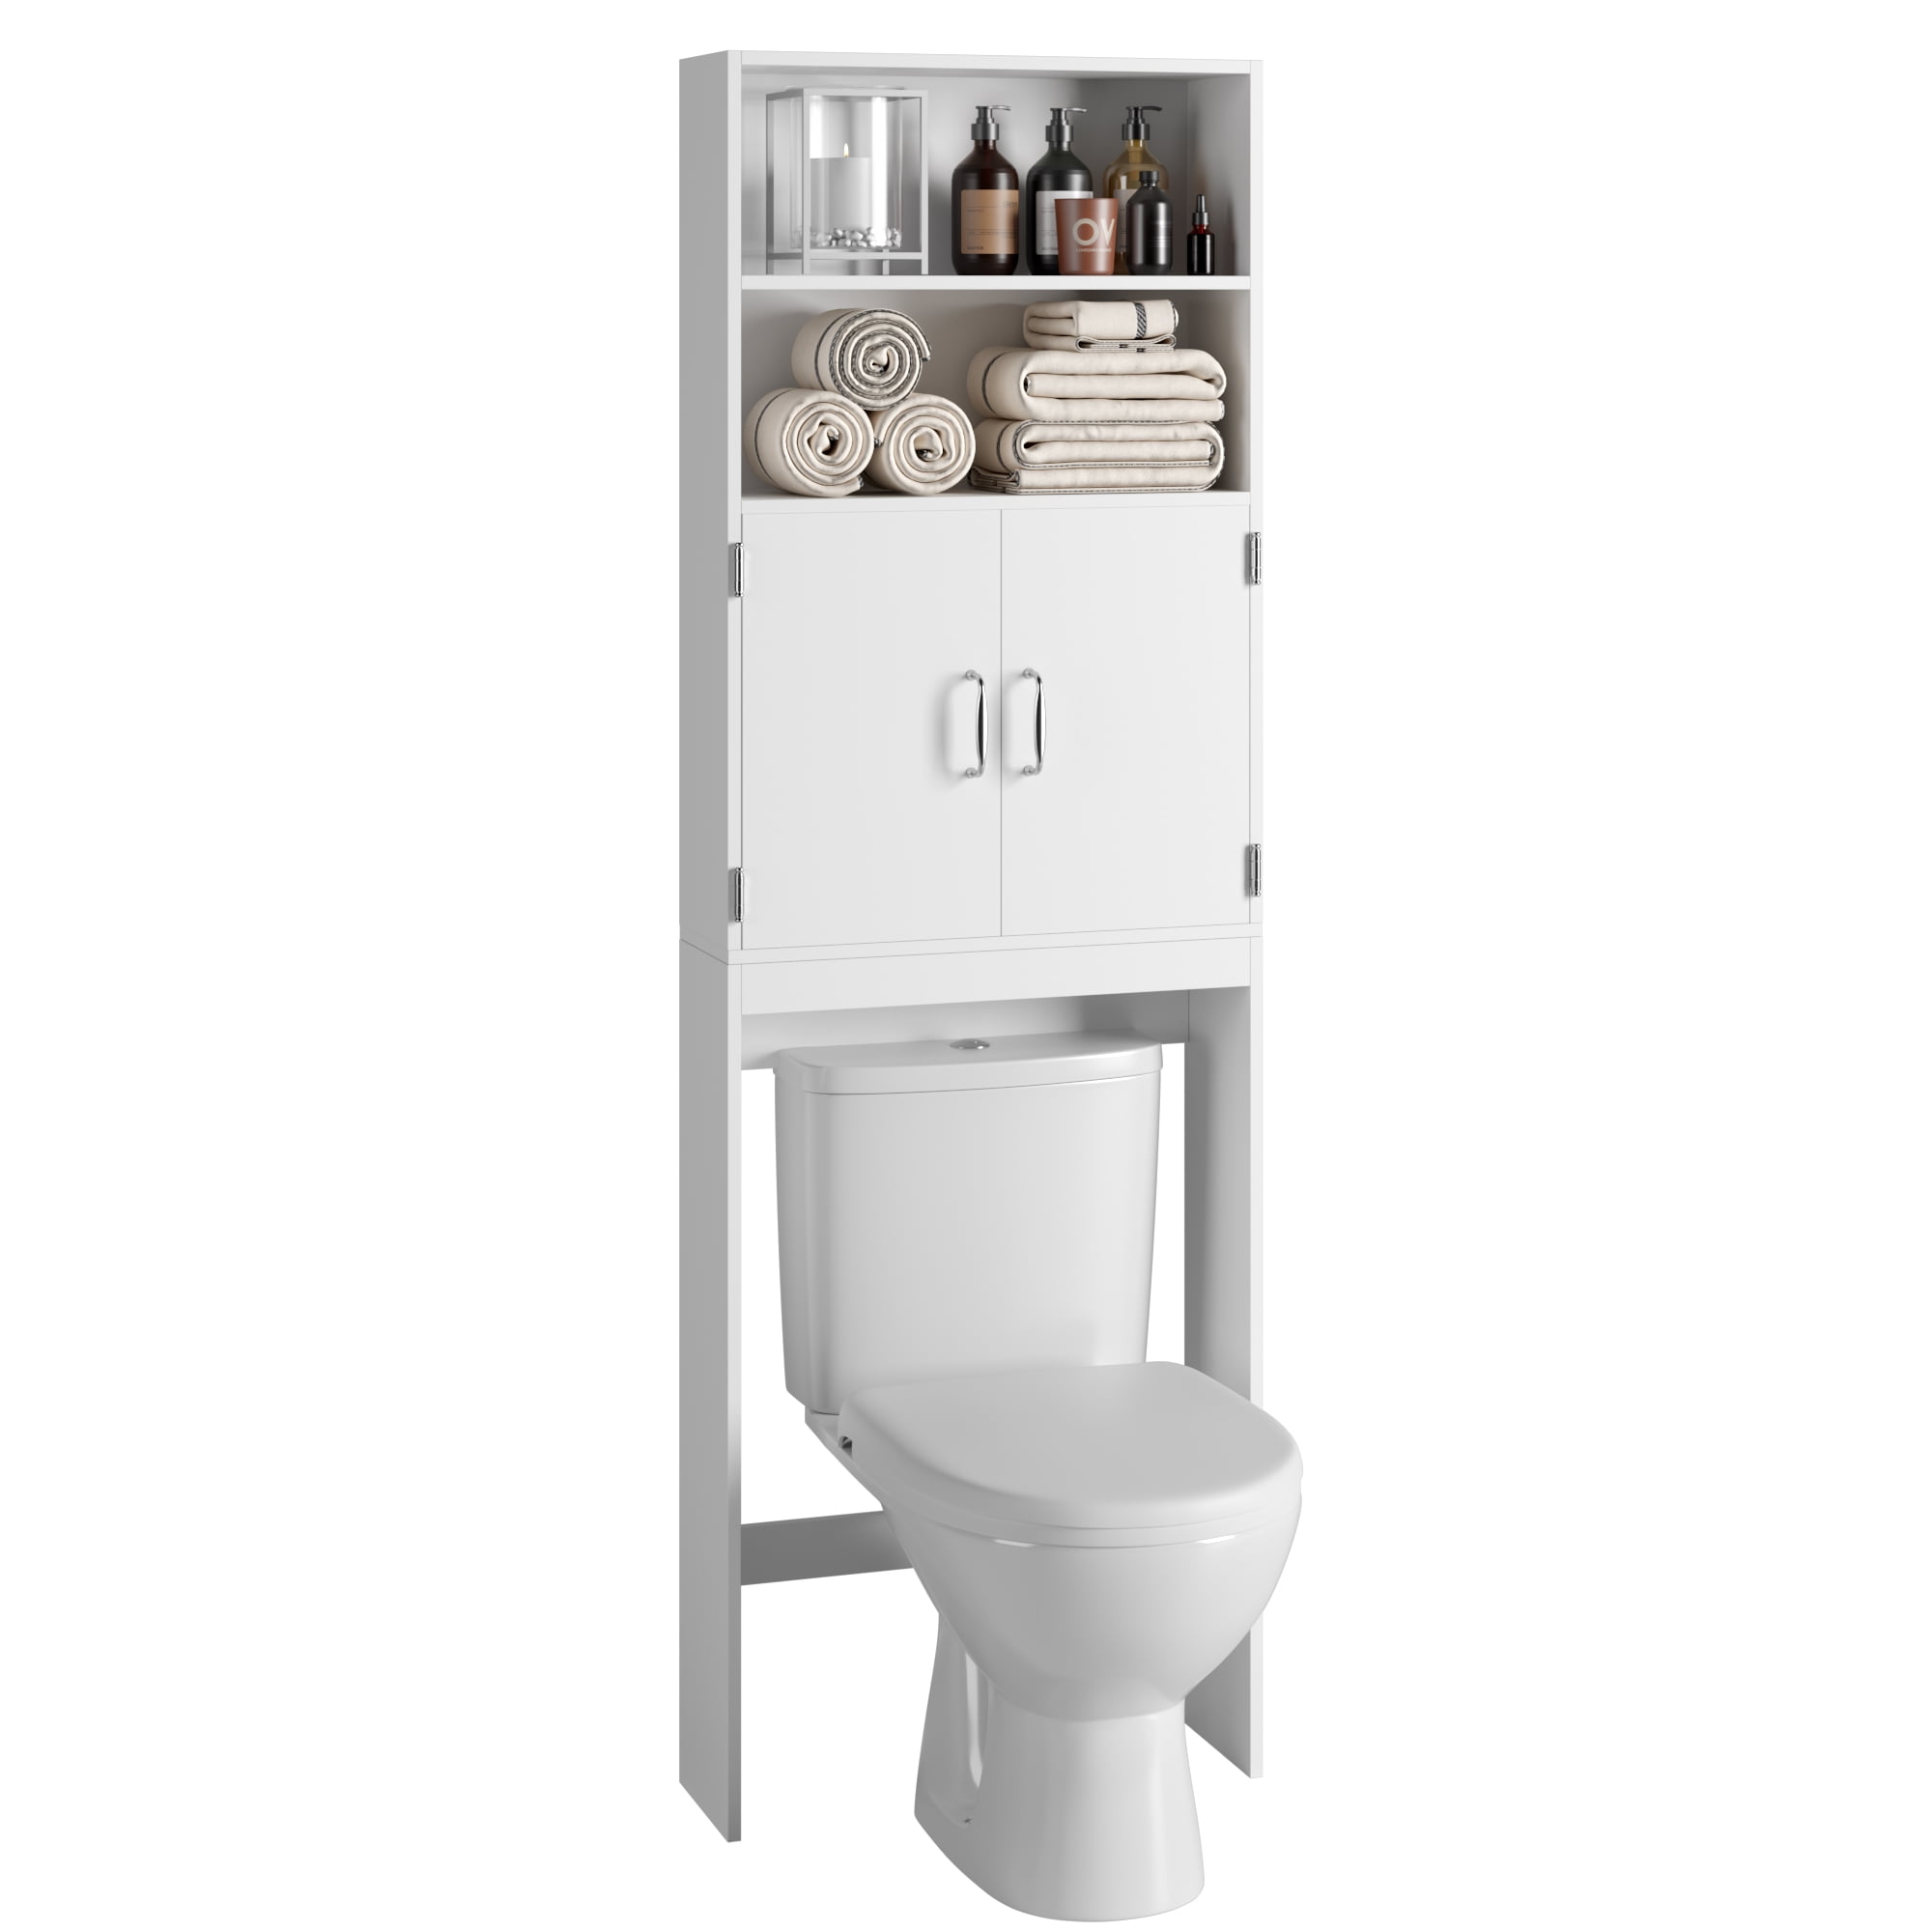 Homfa Over-The-Toilet Storage Cabinet with 2 Side Doors, Freestanding  Toilet Cabinet Organizer with Adjustable Shelves & Paper Holder, Bathroom  Space